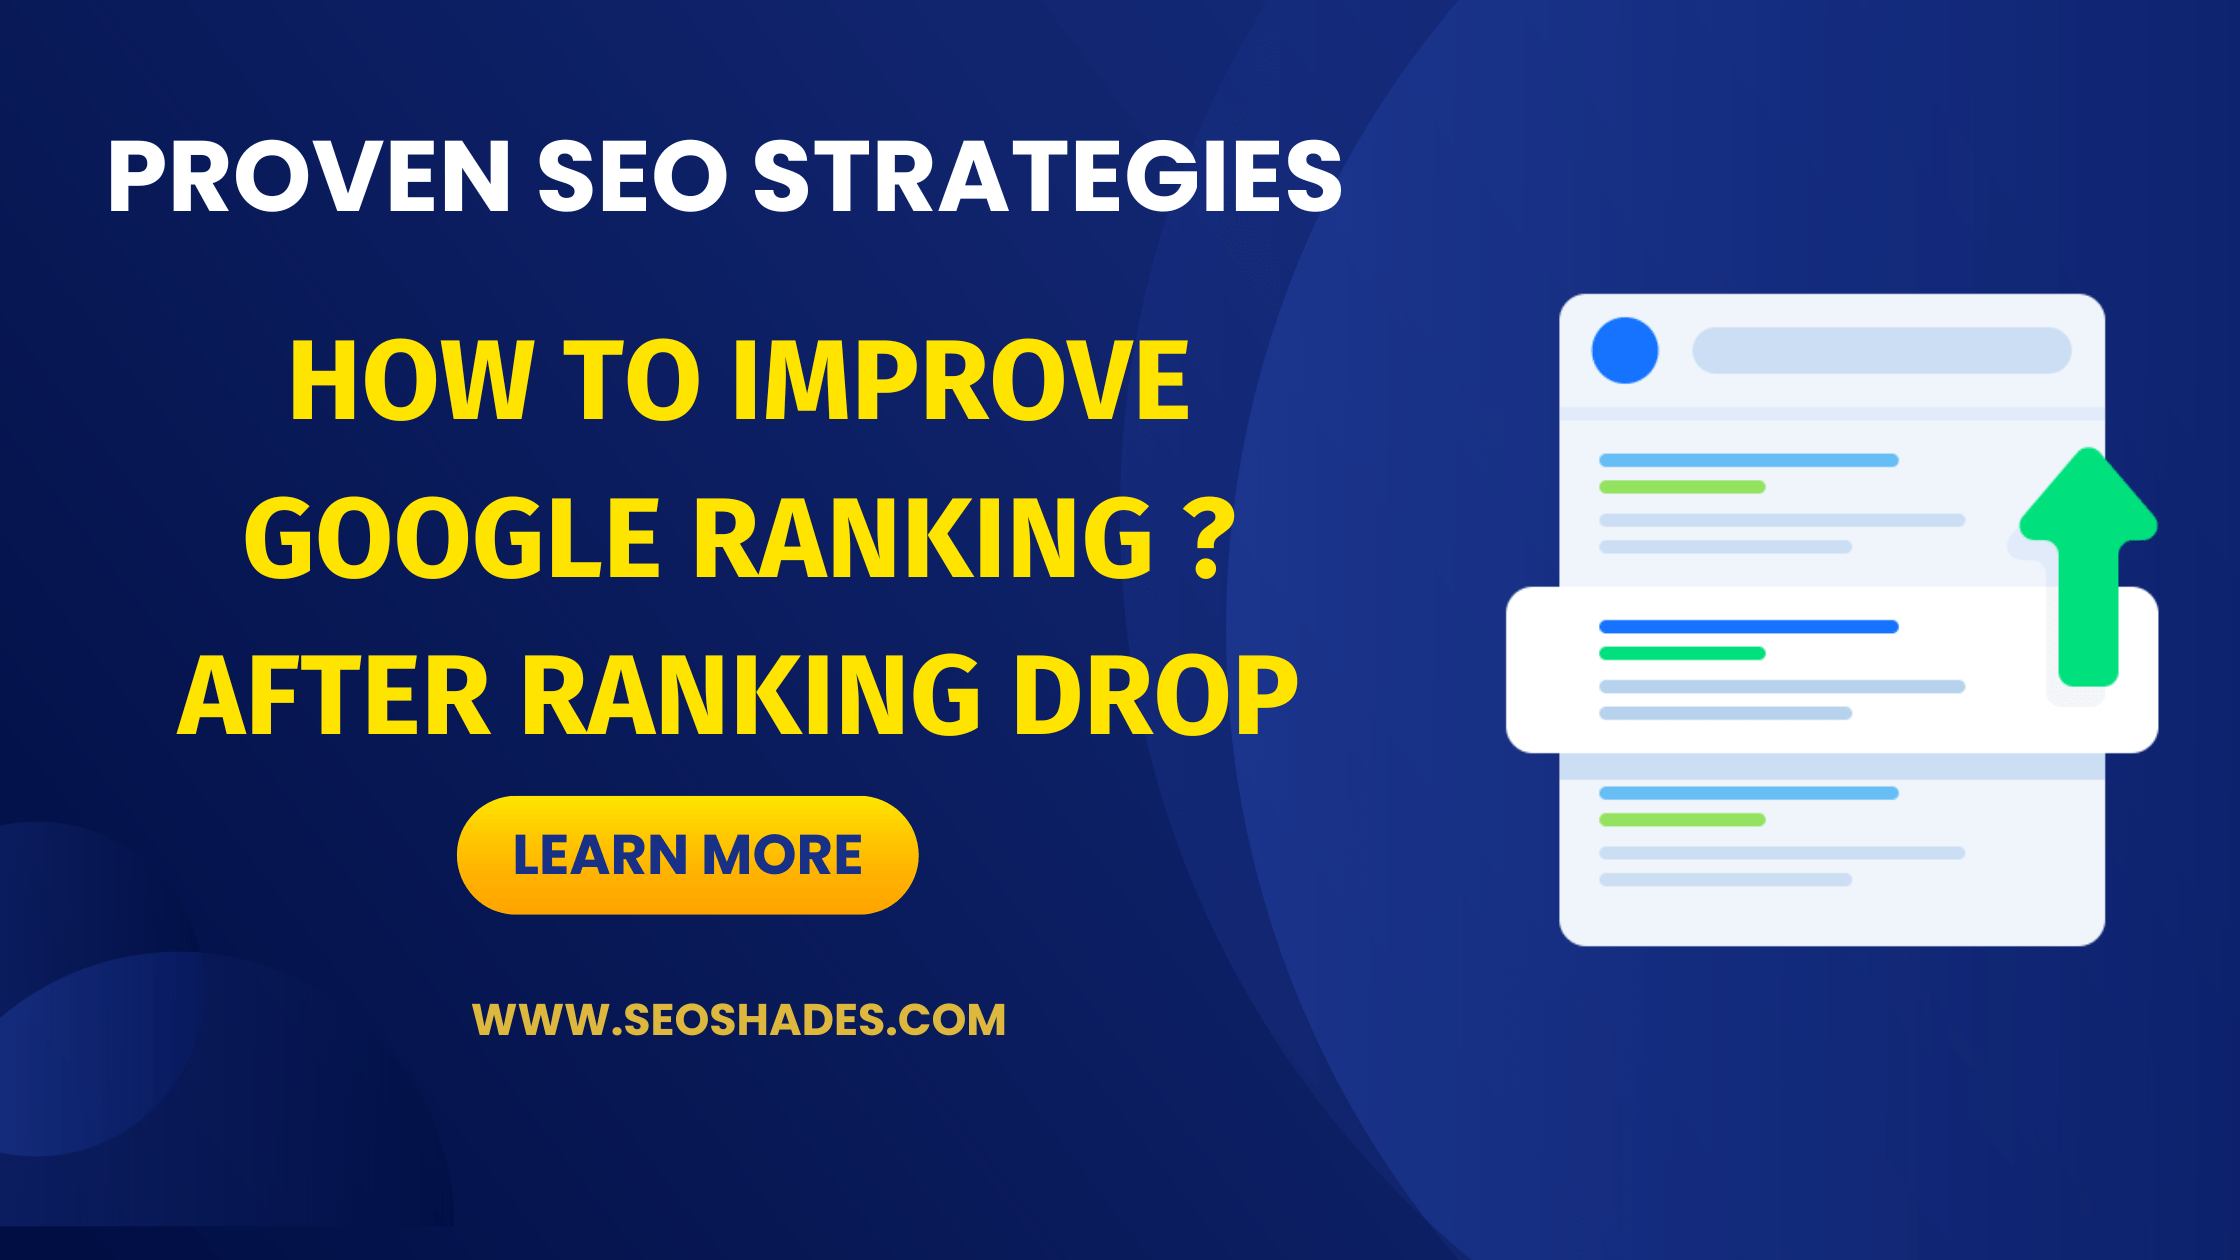 how to improve google ranking After ranking Drop